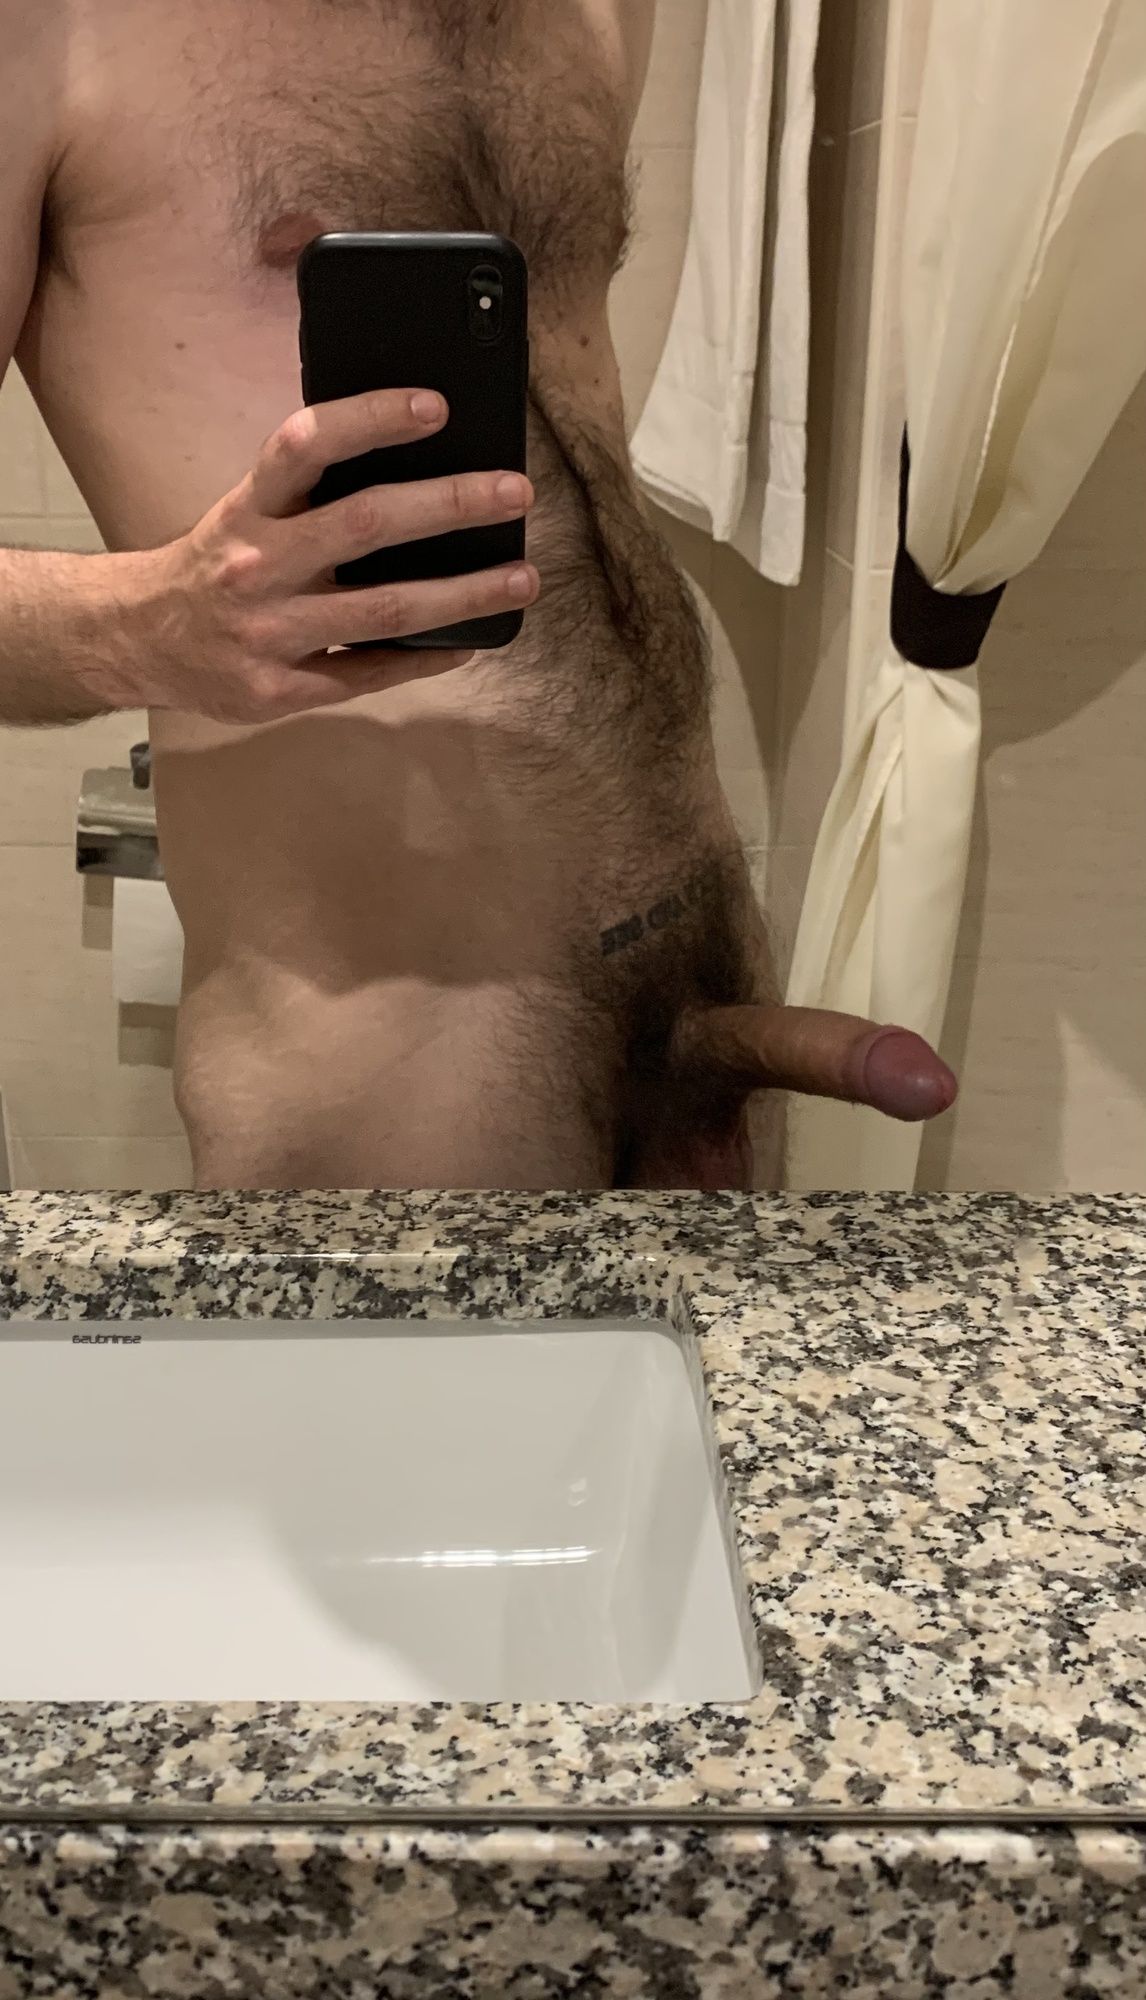 Naked in the hotel bathroom #2